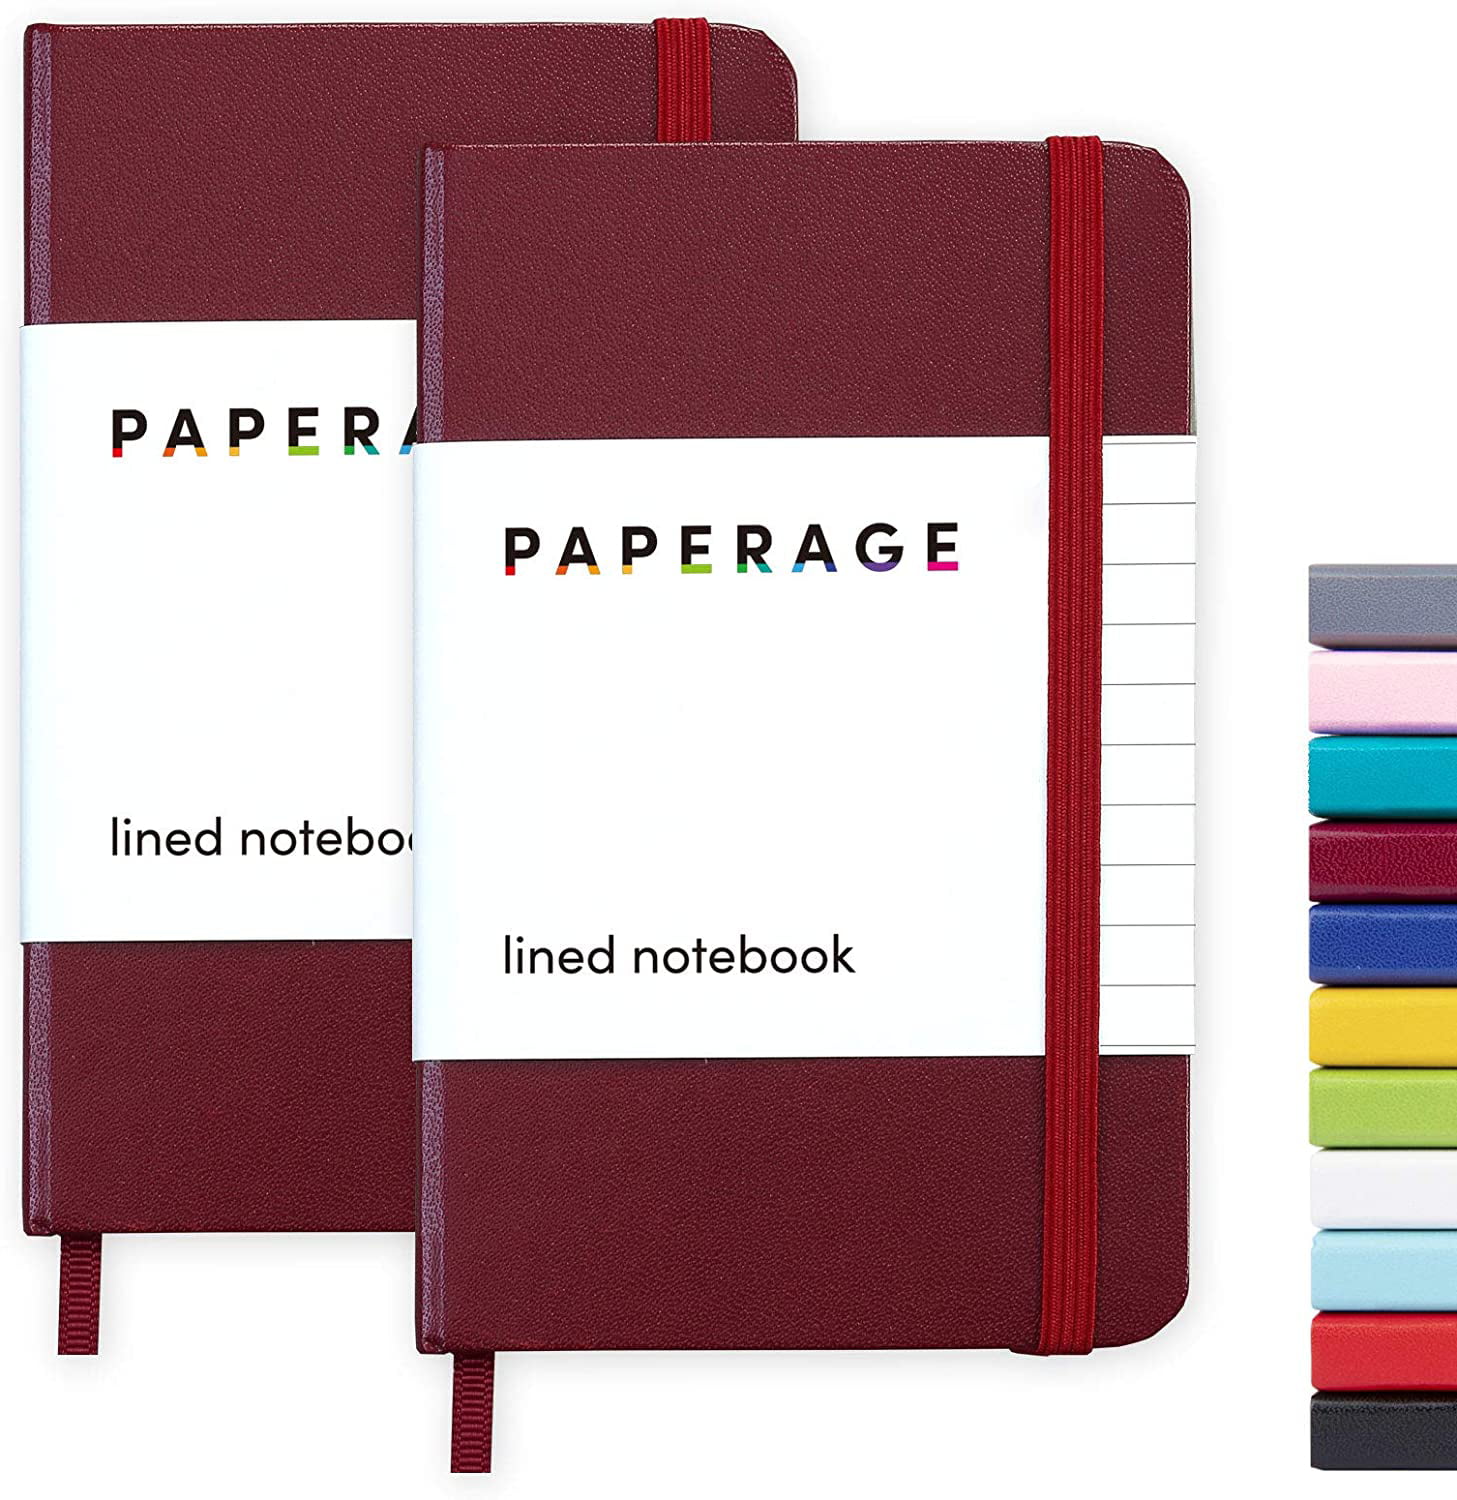 2 HARDBACK NOTEBOOKS A6 Ruled Paper Writing School Office Small Jotter/Book/Pad 